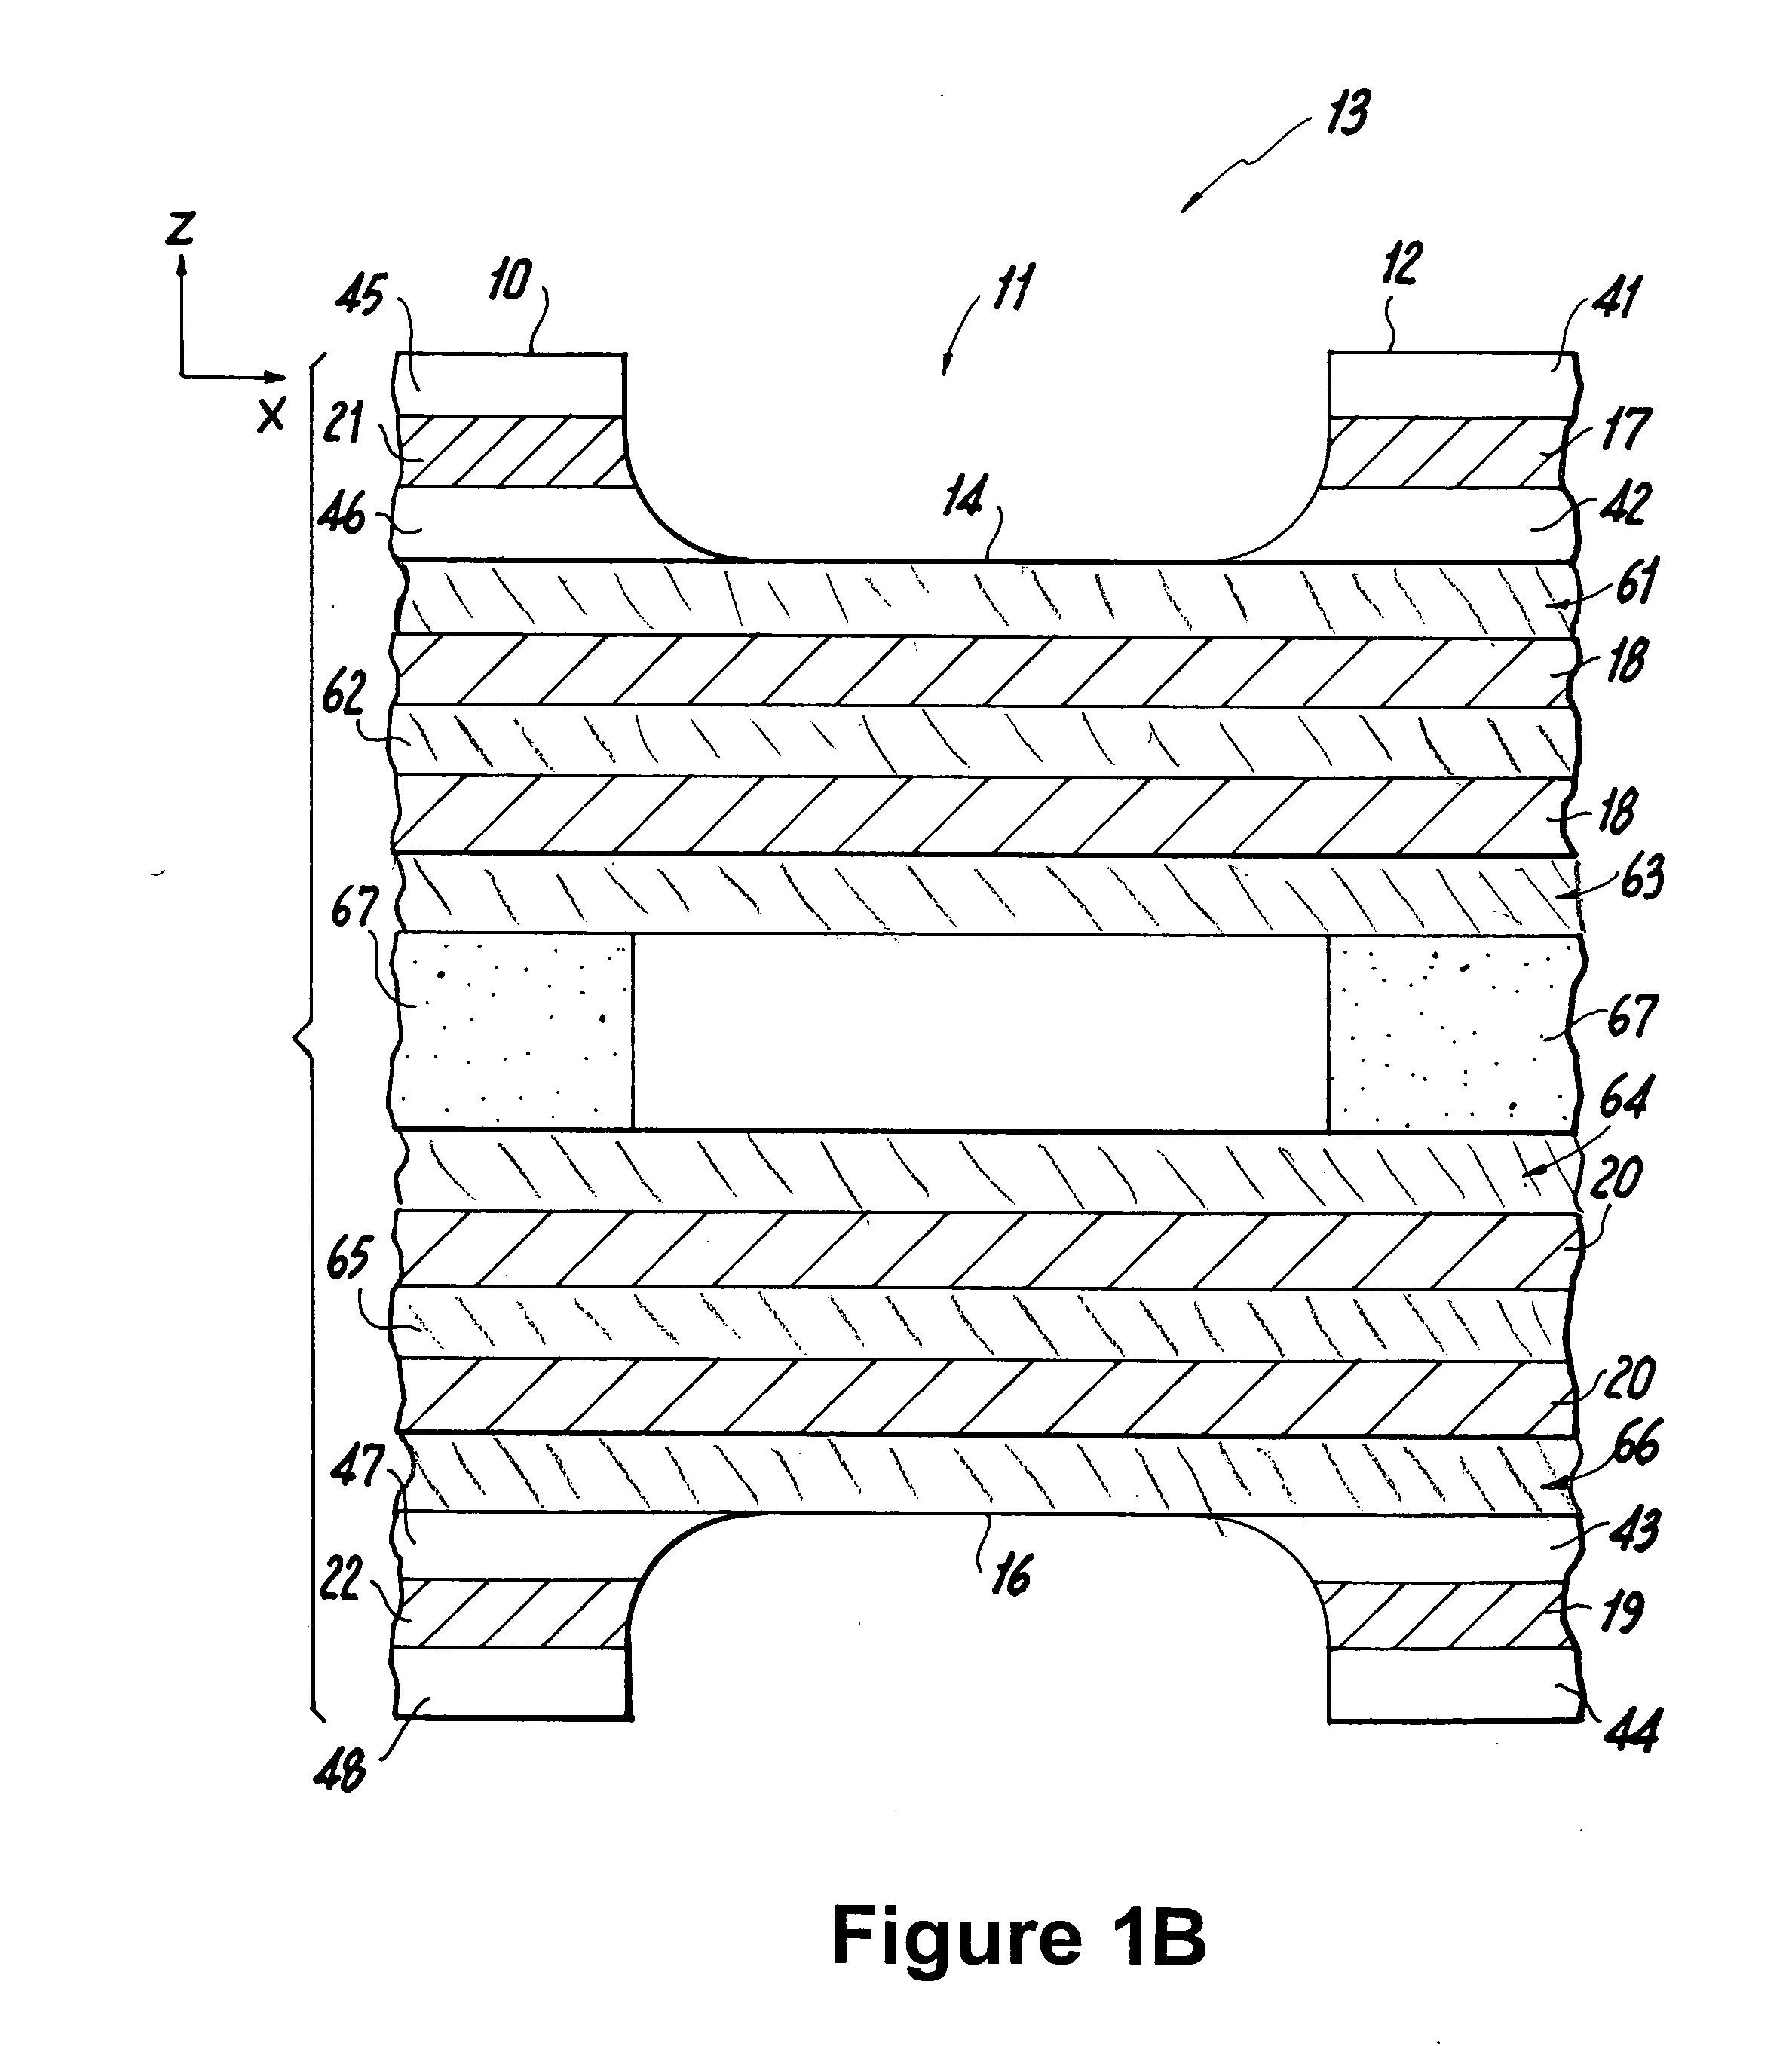 Method and apparatus to pre-form two or more integrated connectorless cables in the flexible sections of rigid-flex printed circuit boards